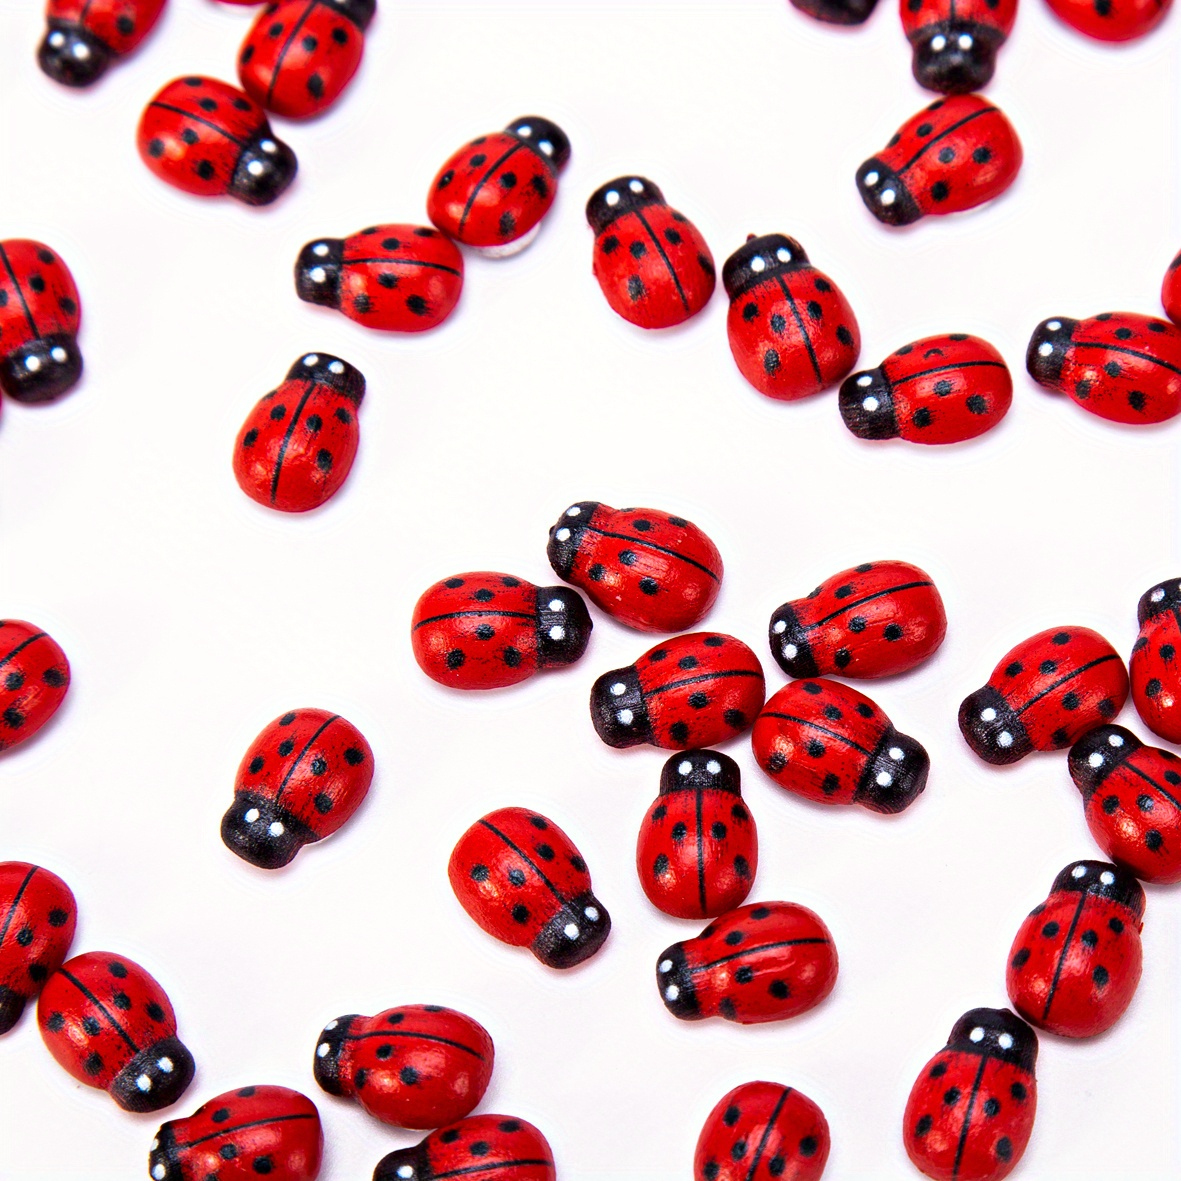 100pcs wood mini 8x11mm red ladybug ladybirds self adhesive diy easter crafts home decoration wooden card making toppers embellishments flatback stickers details 1